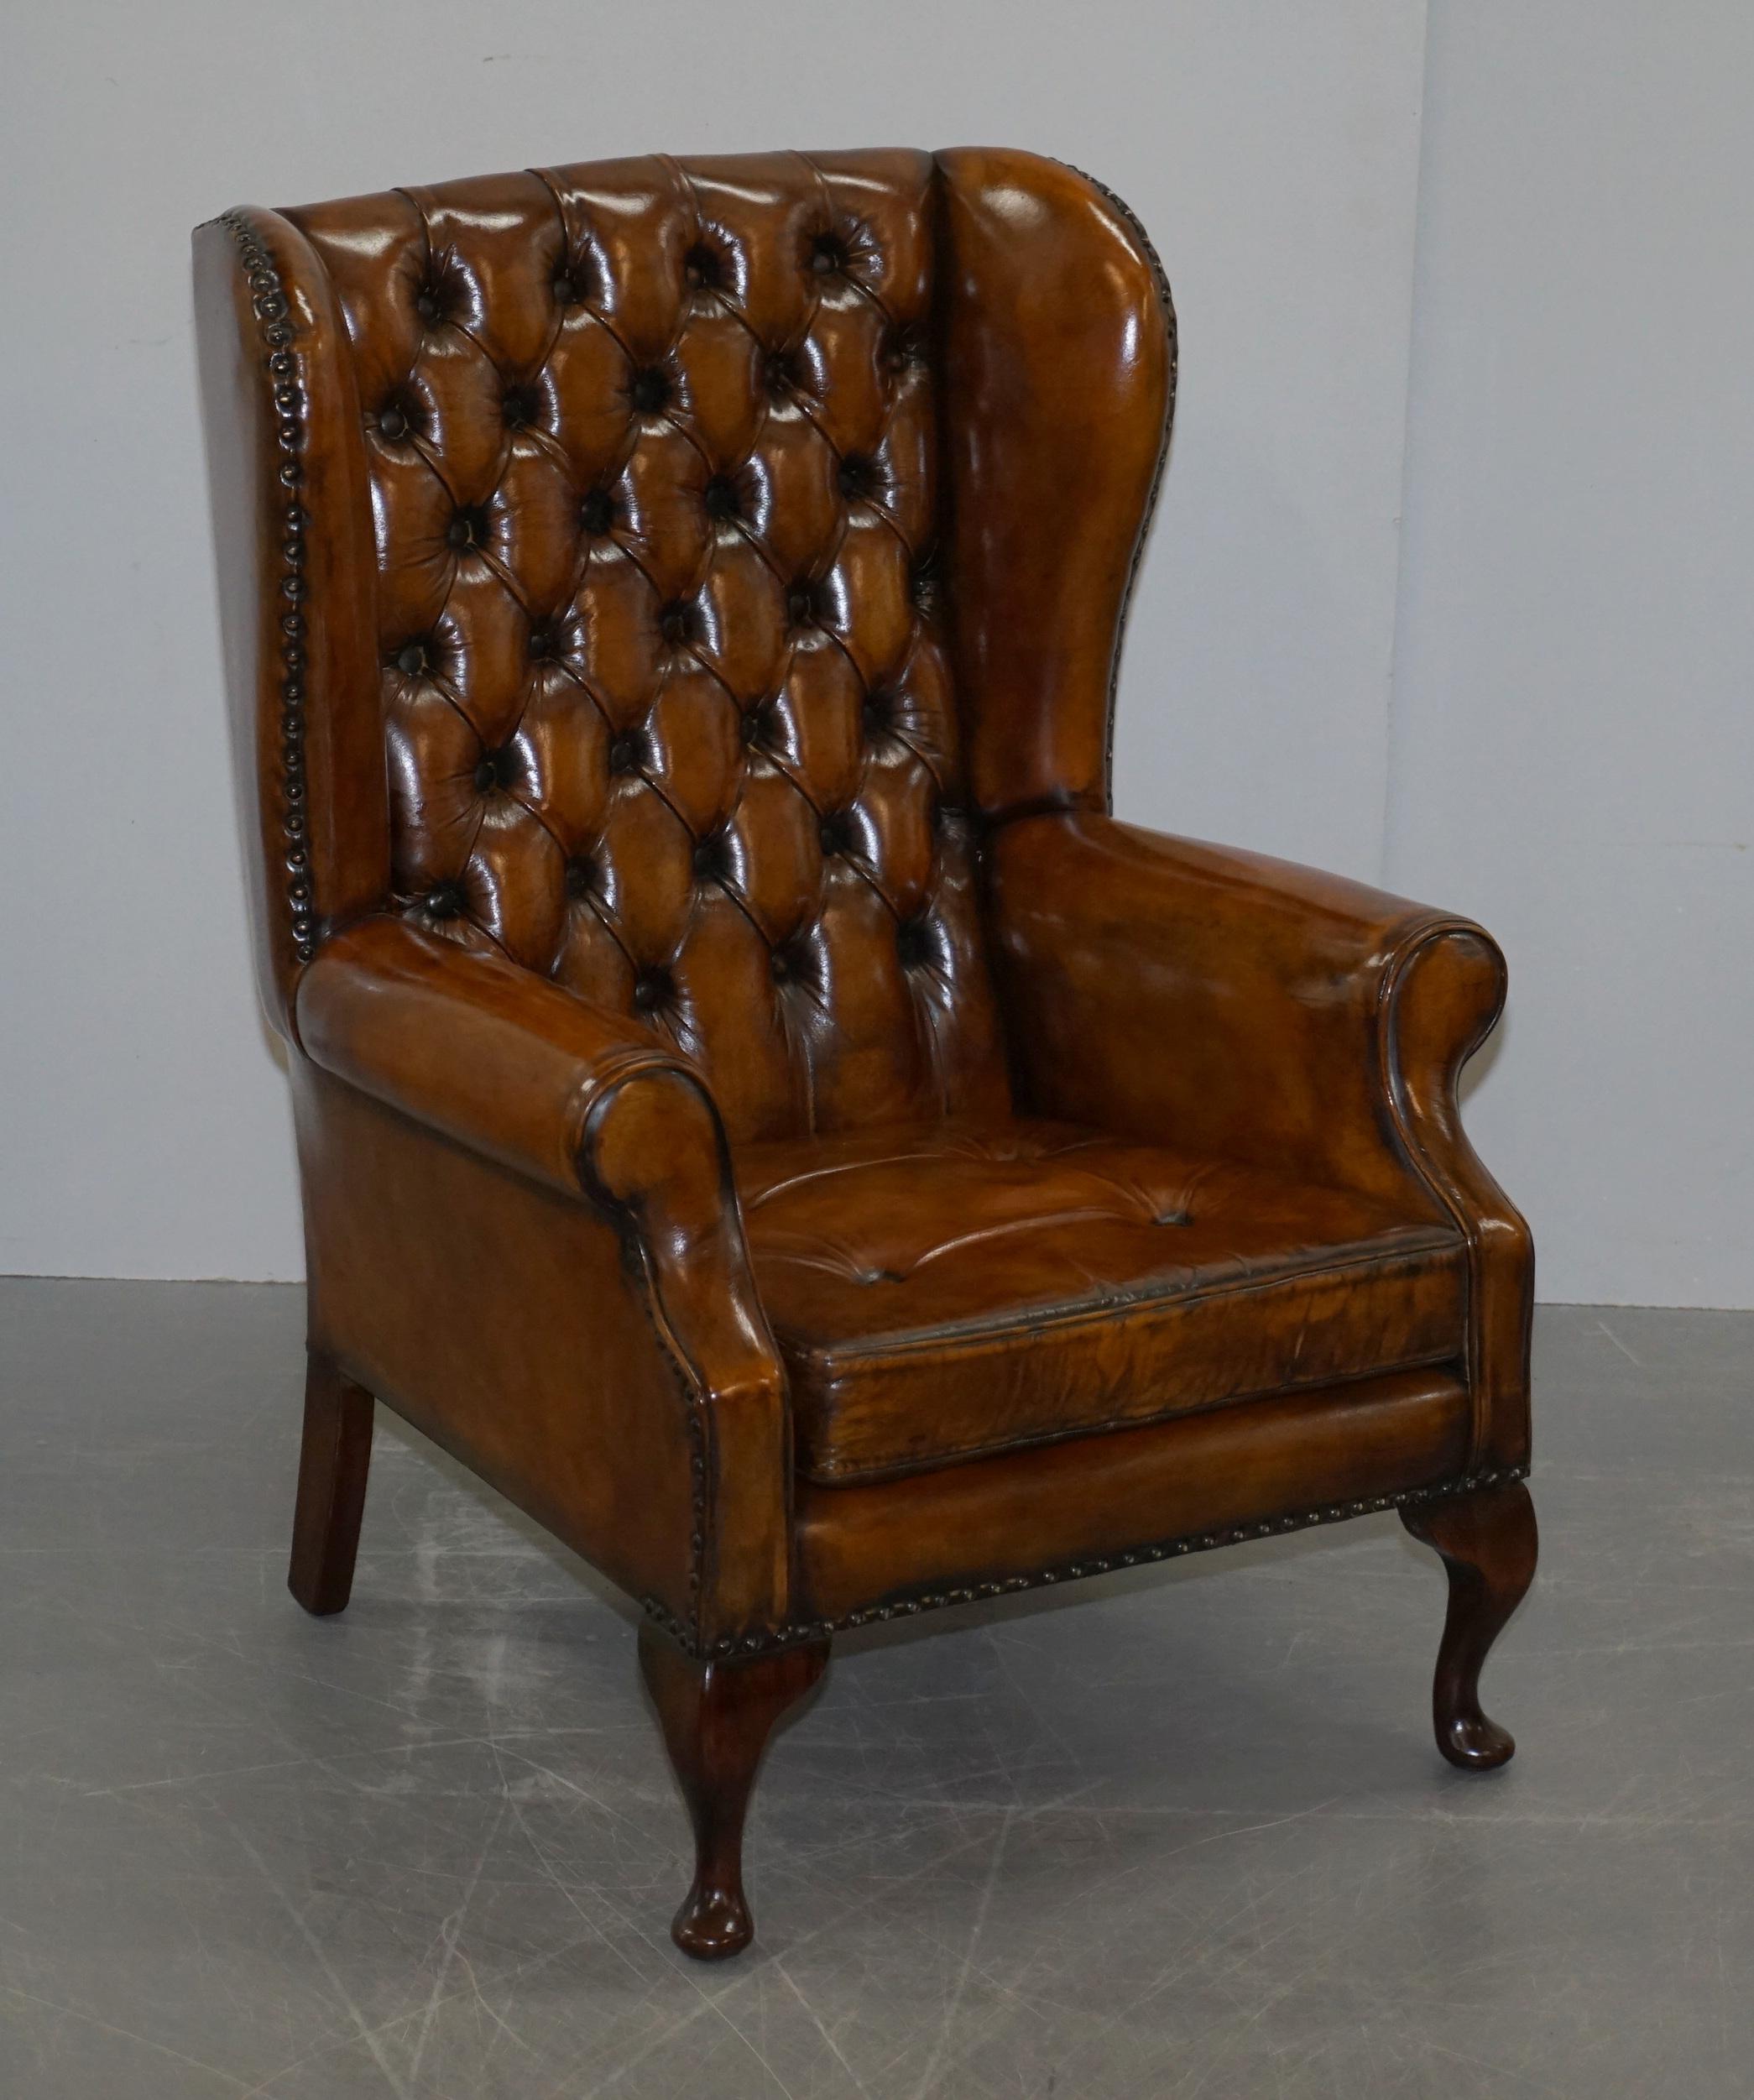 We are delighted to offer for sale this stunning pair of Thomas Chippendale style Chesterfield fully restored vintage wingback armchairs in Whisky brown leather with floating button cushions 

A good looking and comfortable pair vintage English